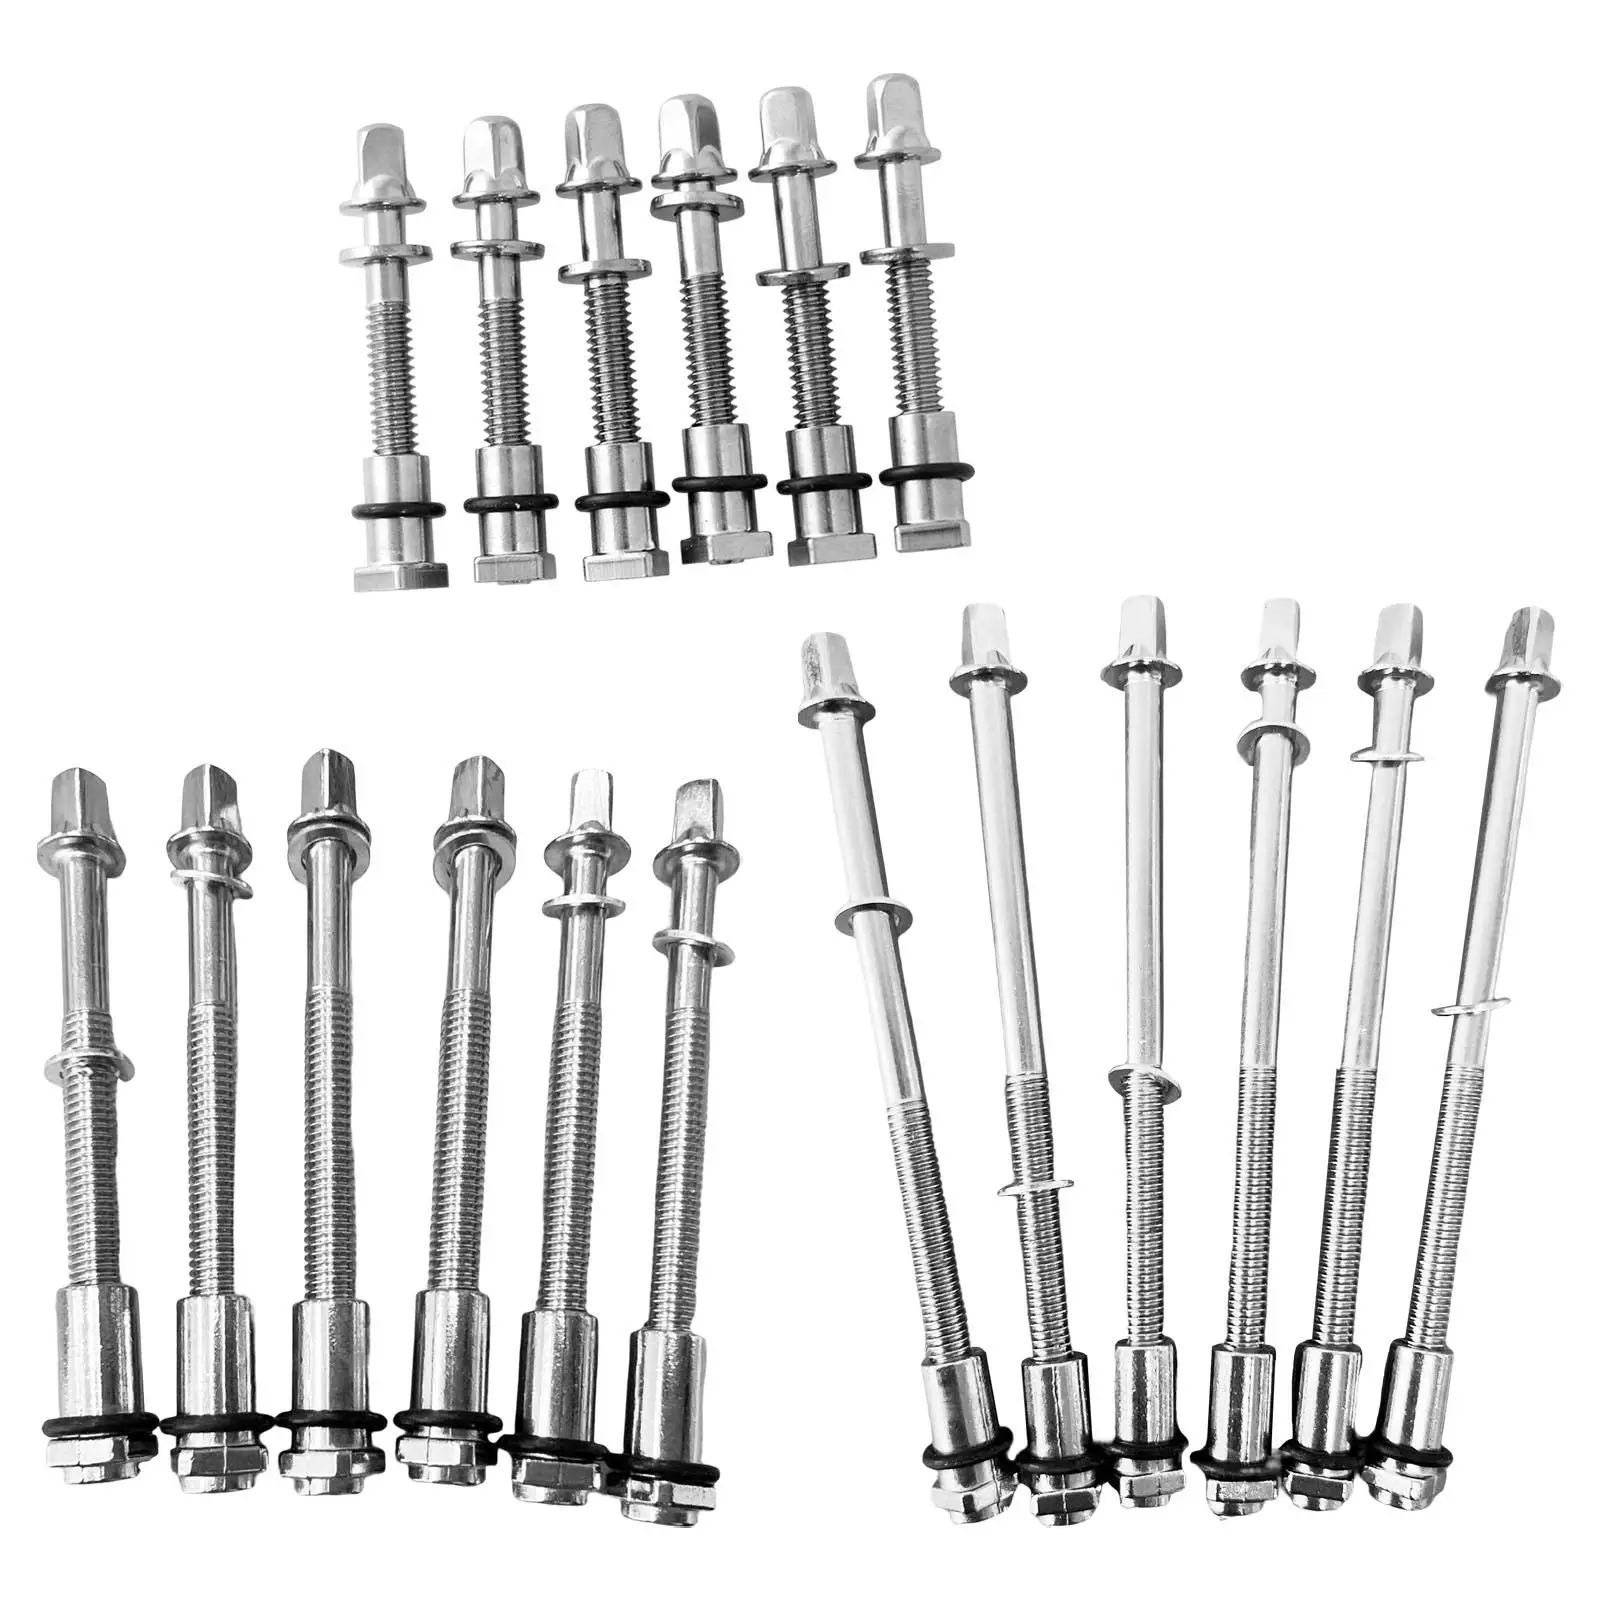 6 Pieces Drum Tension Rods with Washer for Snare Drums Bass Drum Replacement